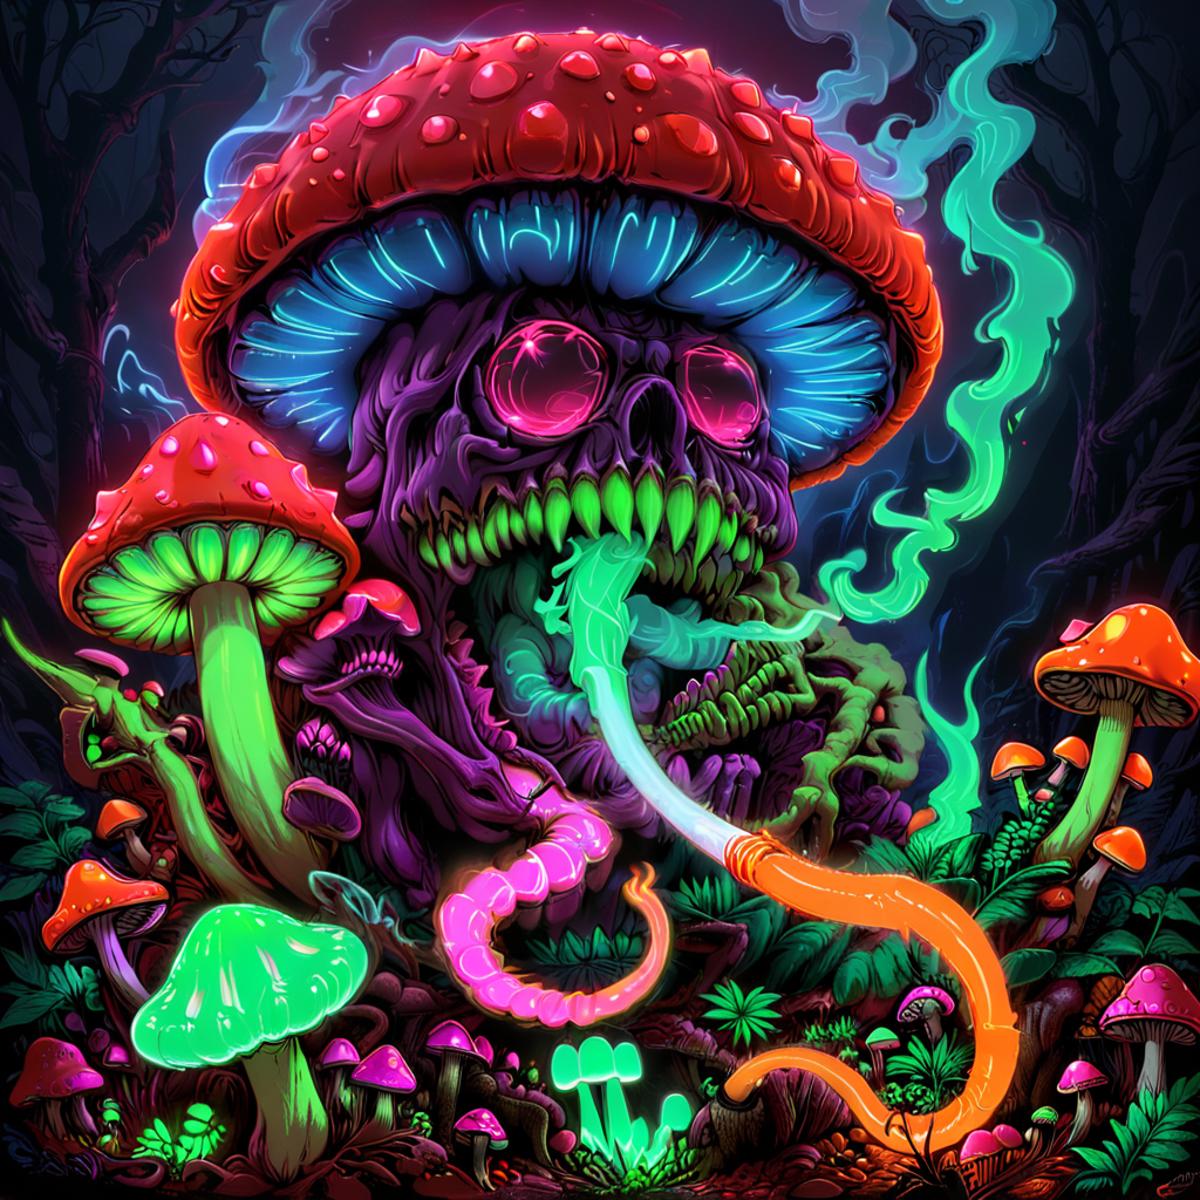 Fantasy Art with a Monster and Mushrooms in a Dark Forest